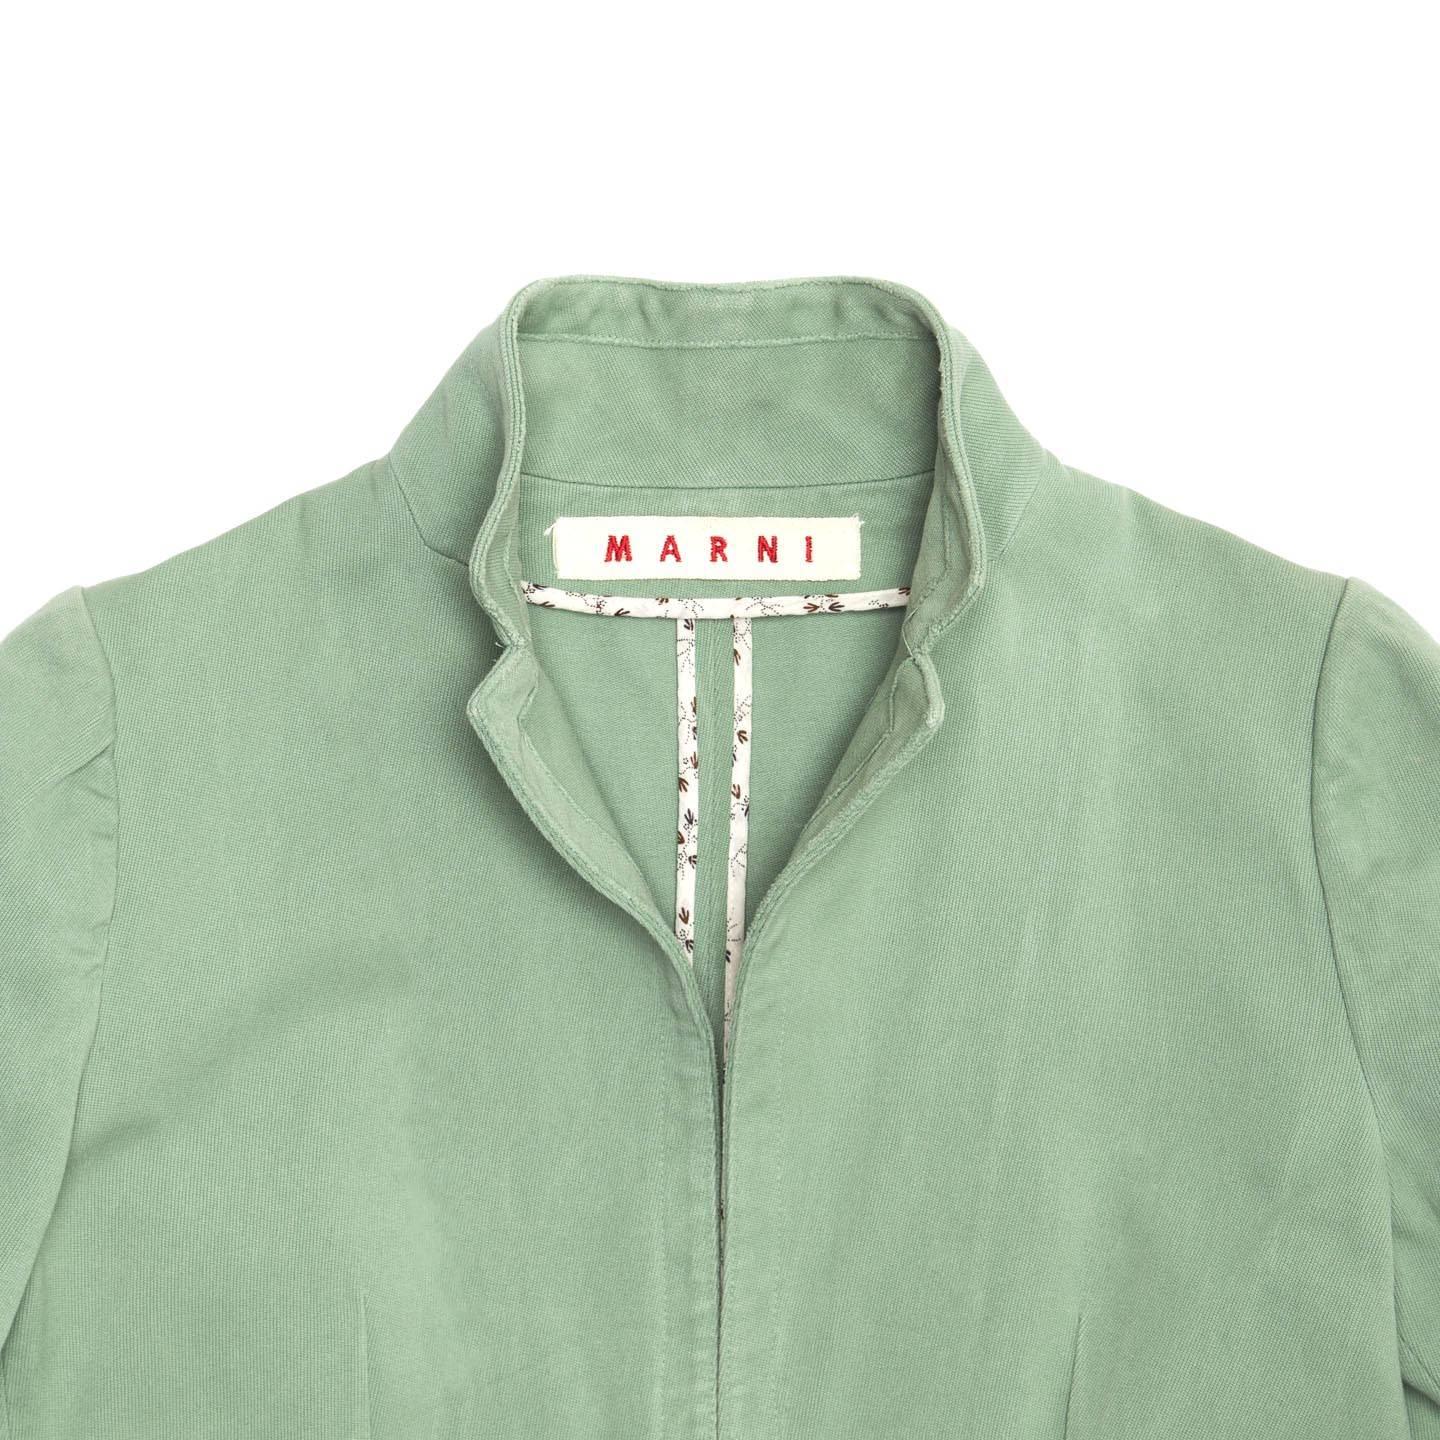 Marni Pastel Green Cotton Jacket In New Condition For Sale In Brooklyn, NY